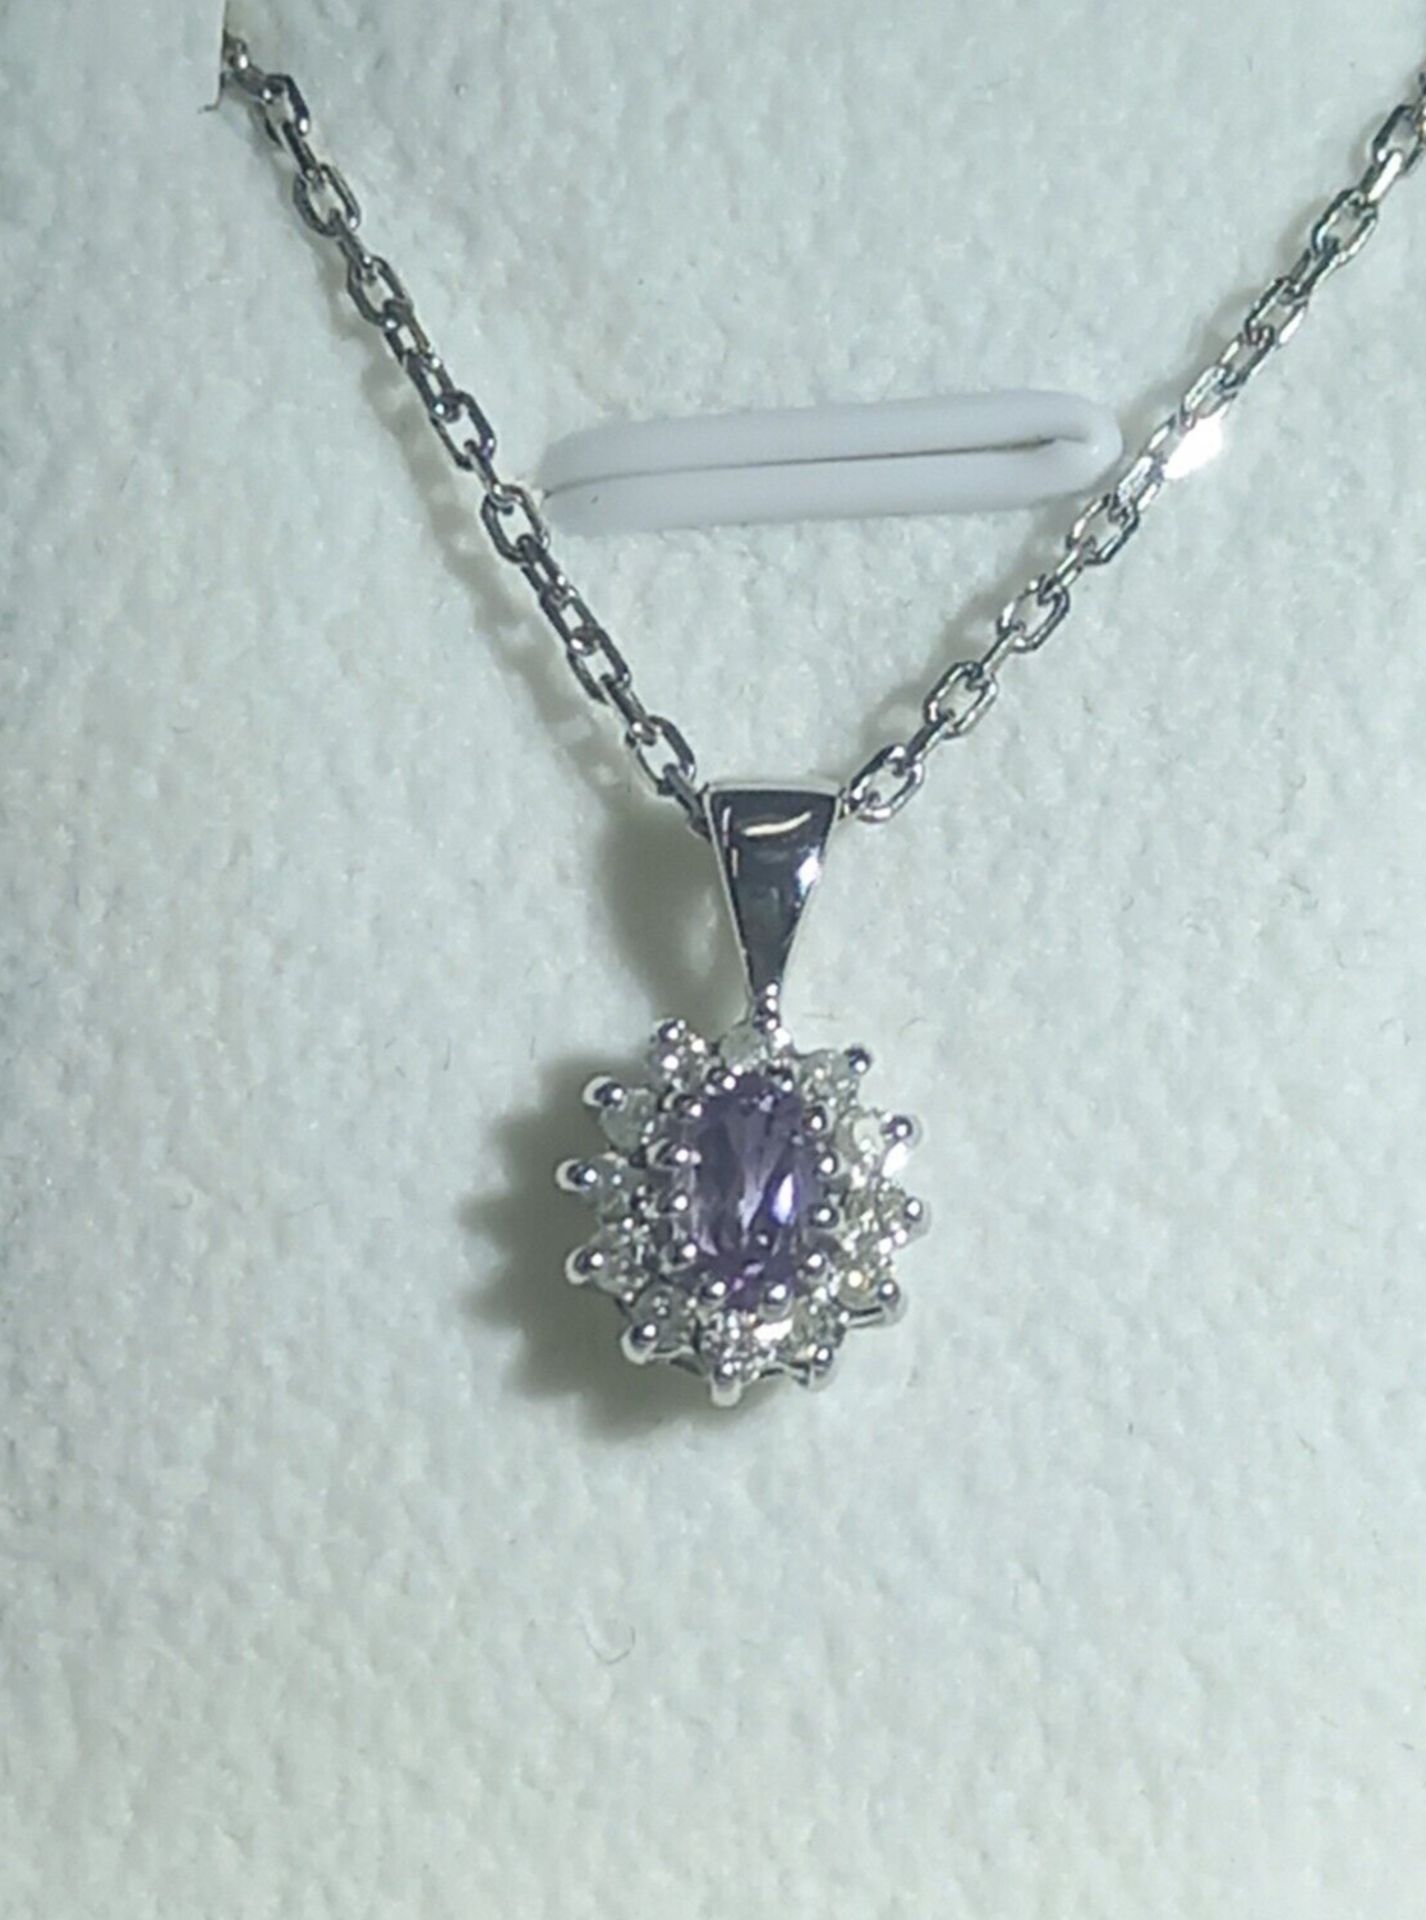 0.12CT DIAMOND & AMYTHIST PENDANT 9CT WHITE GOLD IN GIFT BOX + VALUATION CERTIFICATE OF £795 - Image 2 of 4